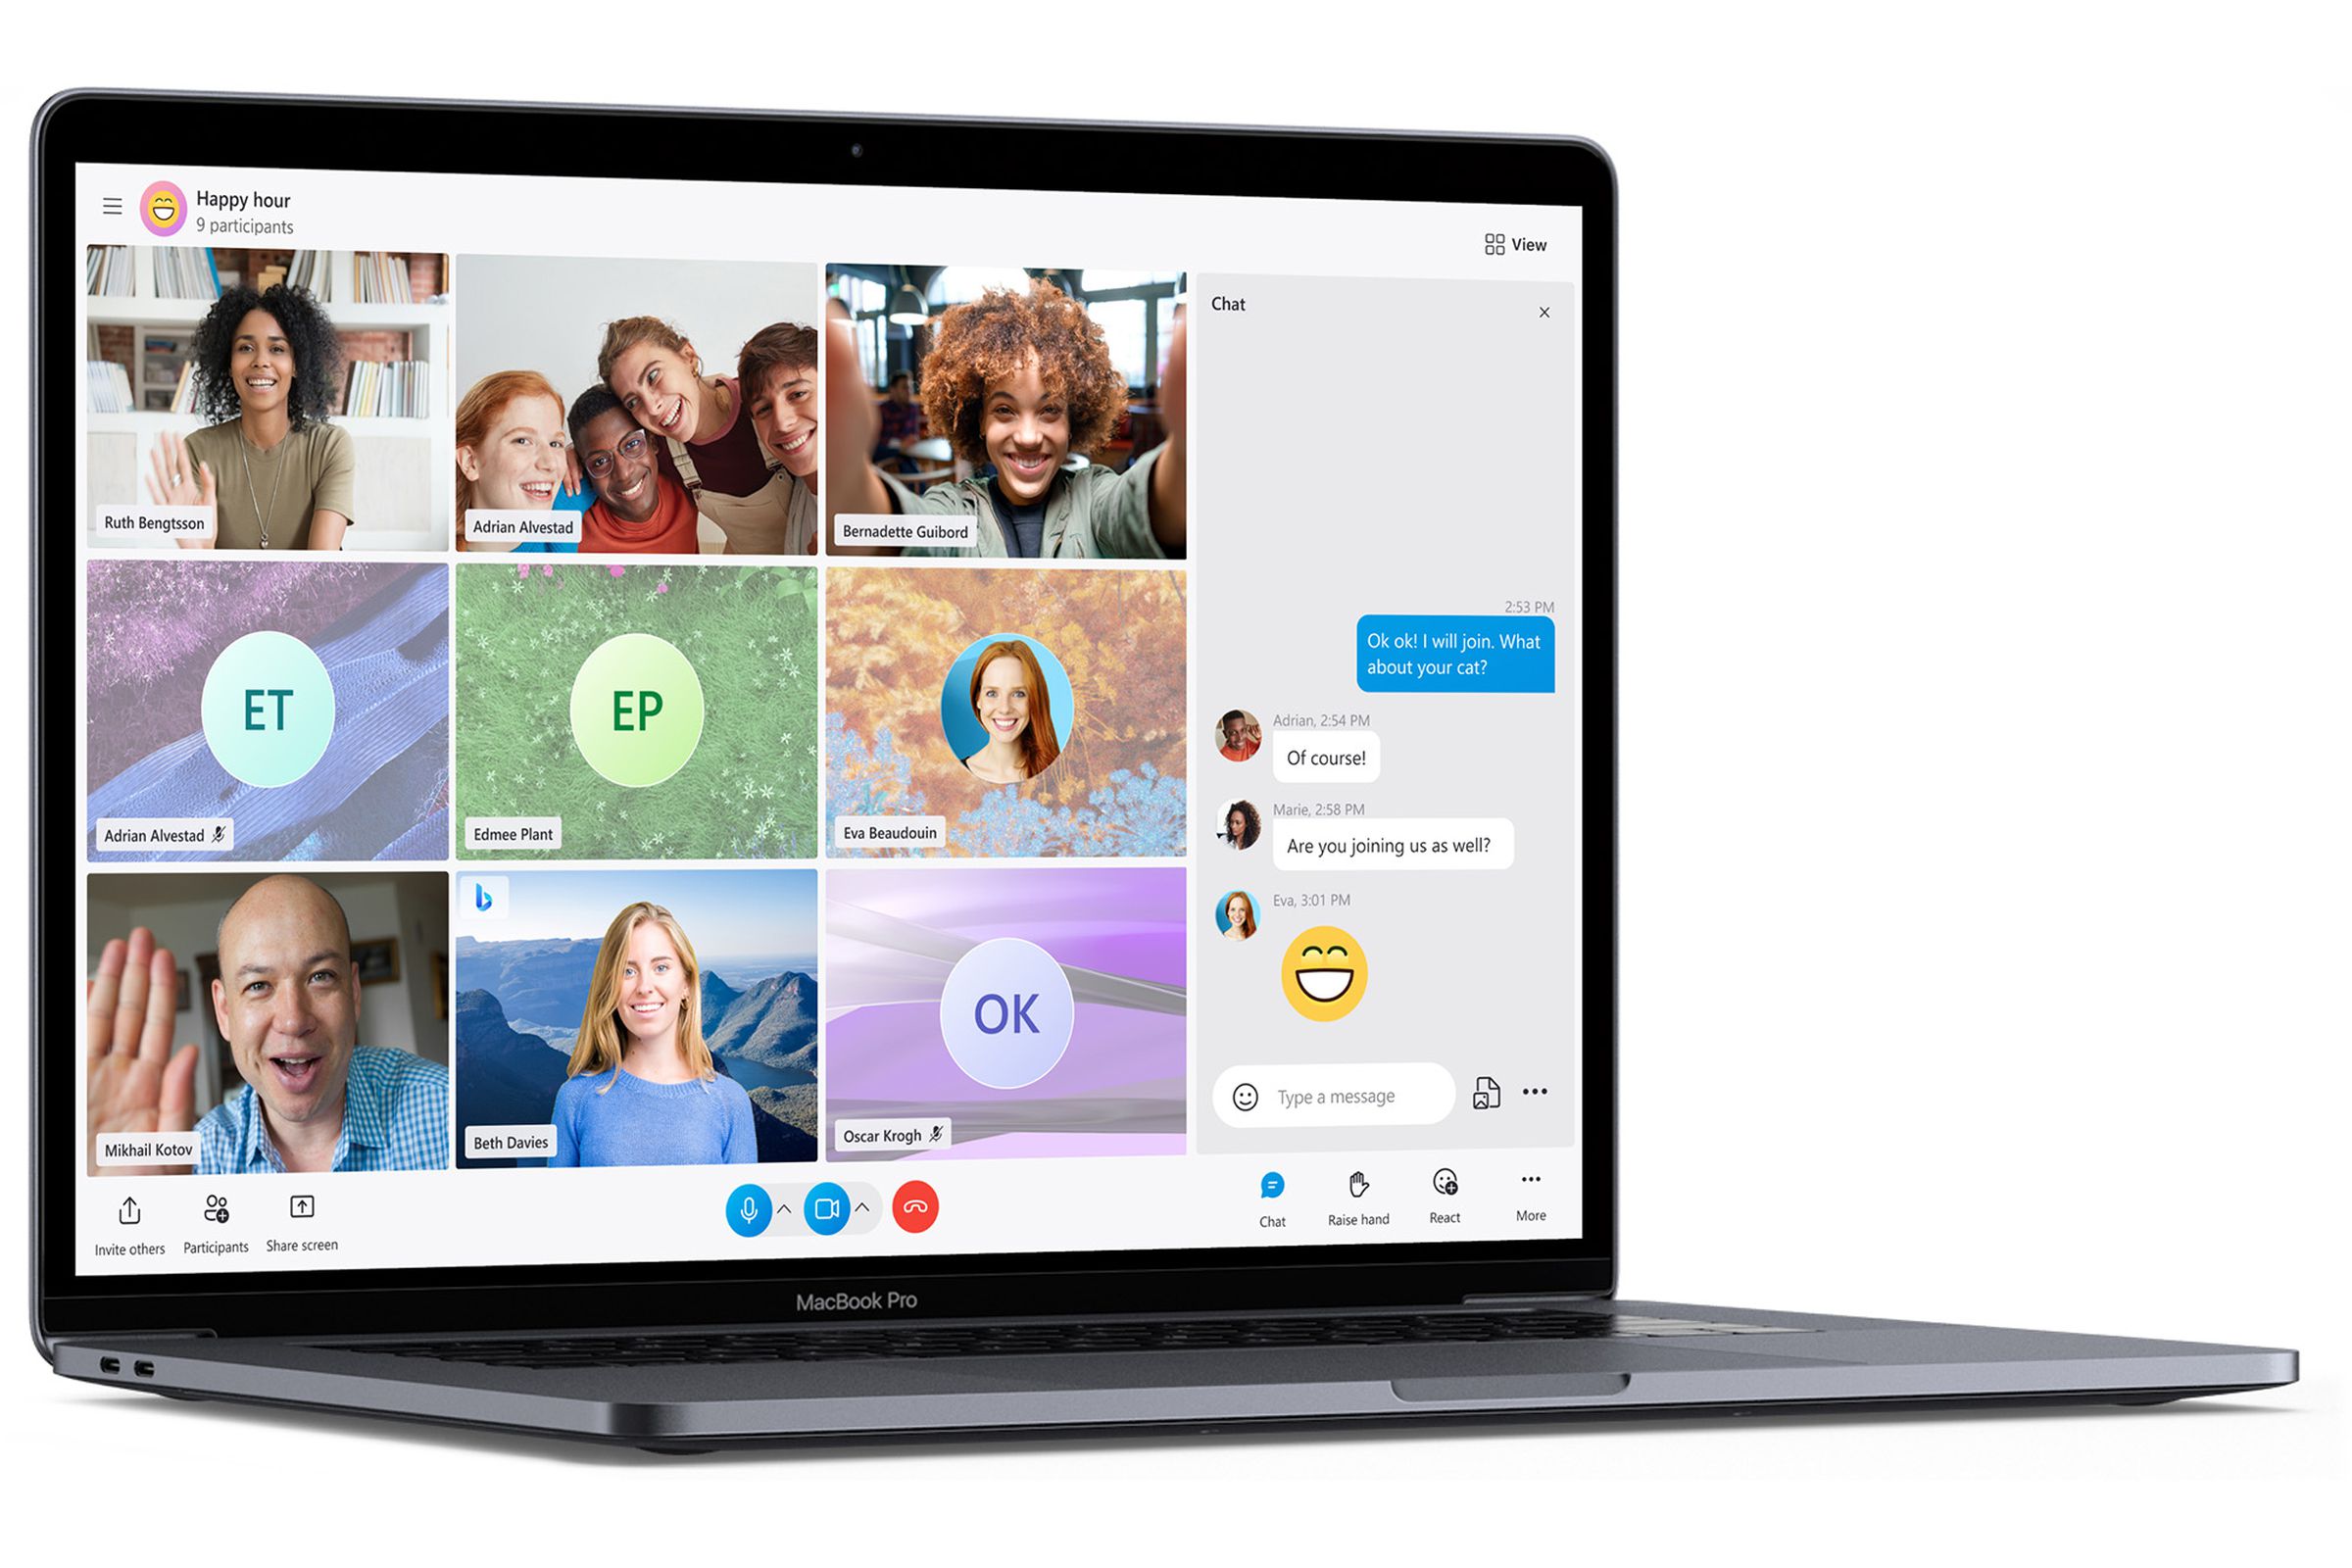 Skype’s new design and colorful layouts.